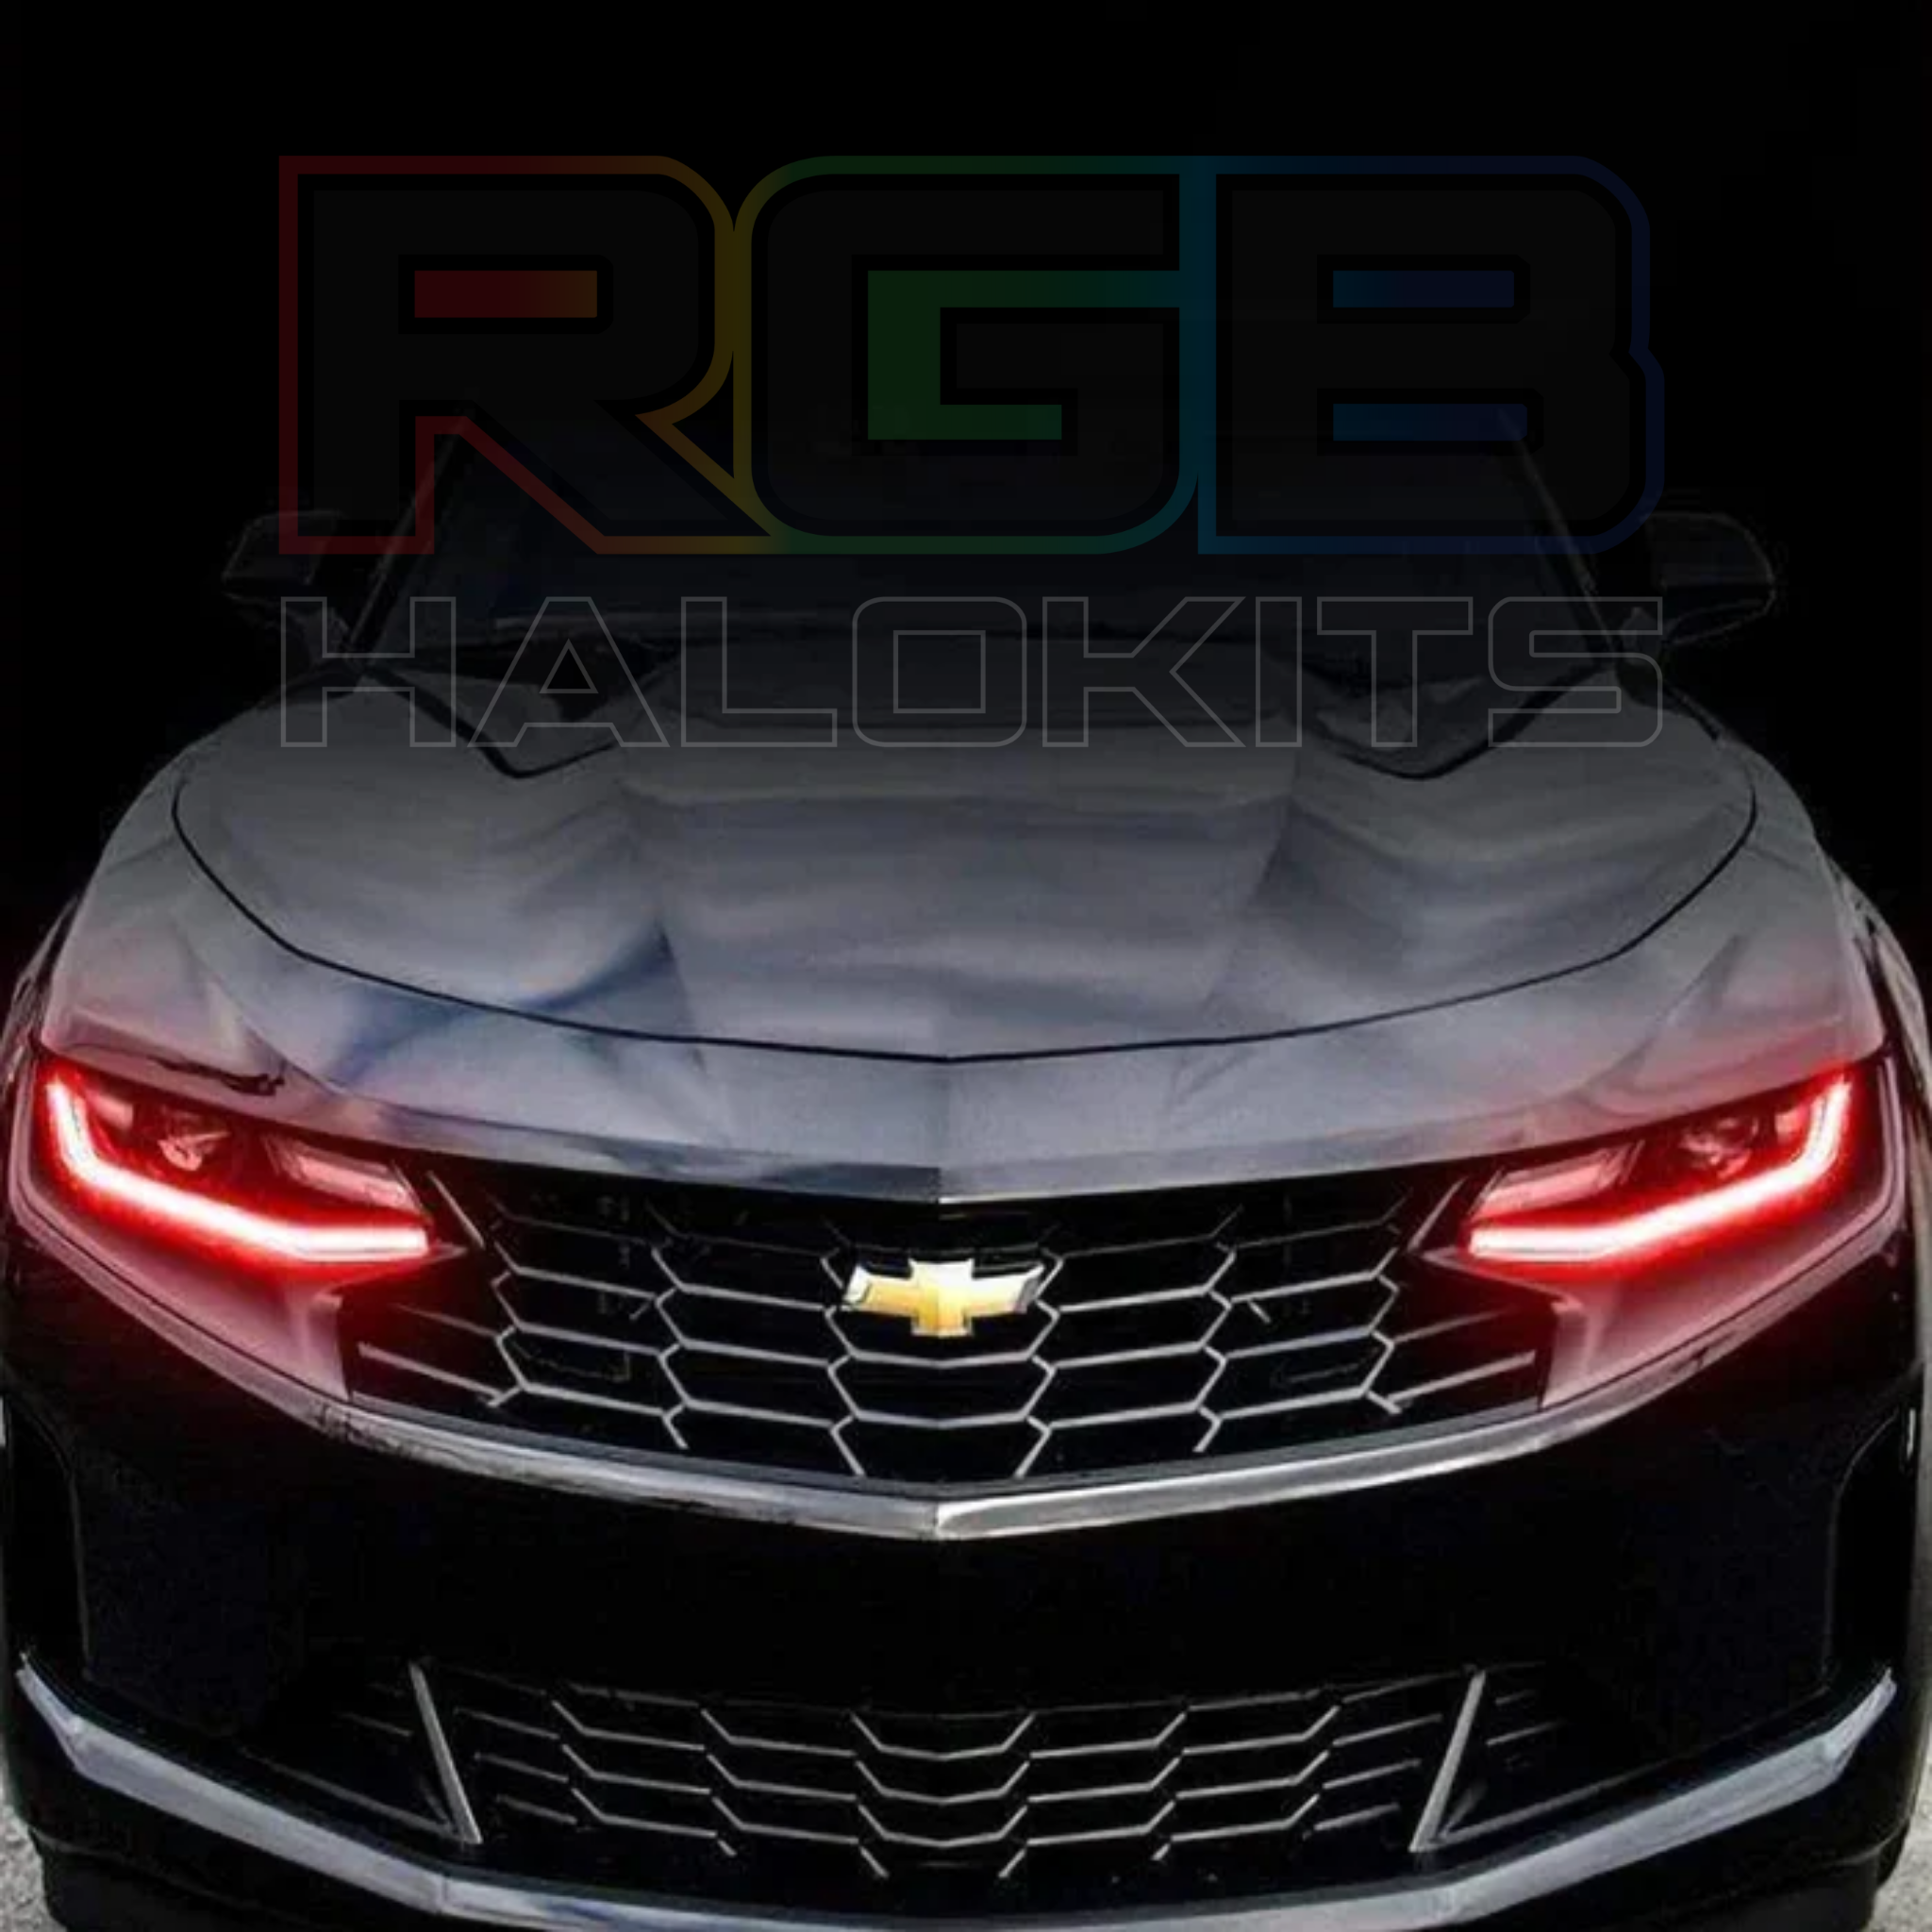 ( 2016-18) & (2019-21) (Chevrolet Camaro RGB DRL Strips (Waterproof Exterior Mount) Install Guide